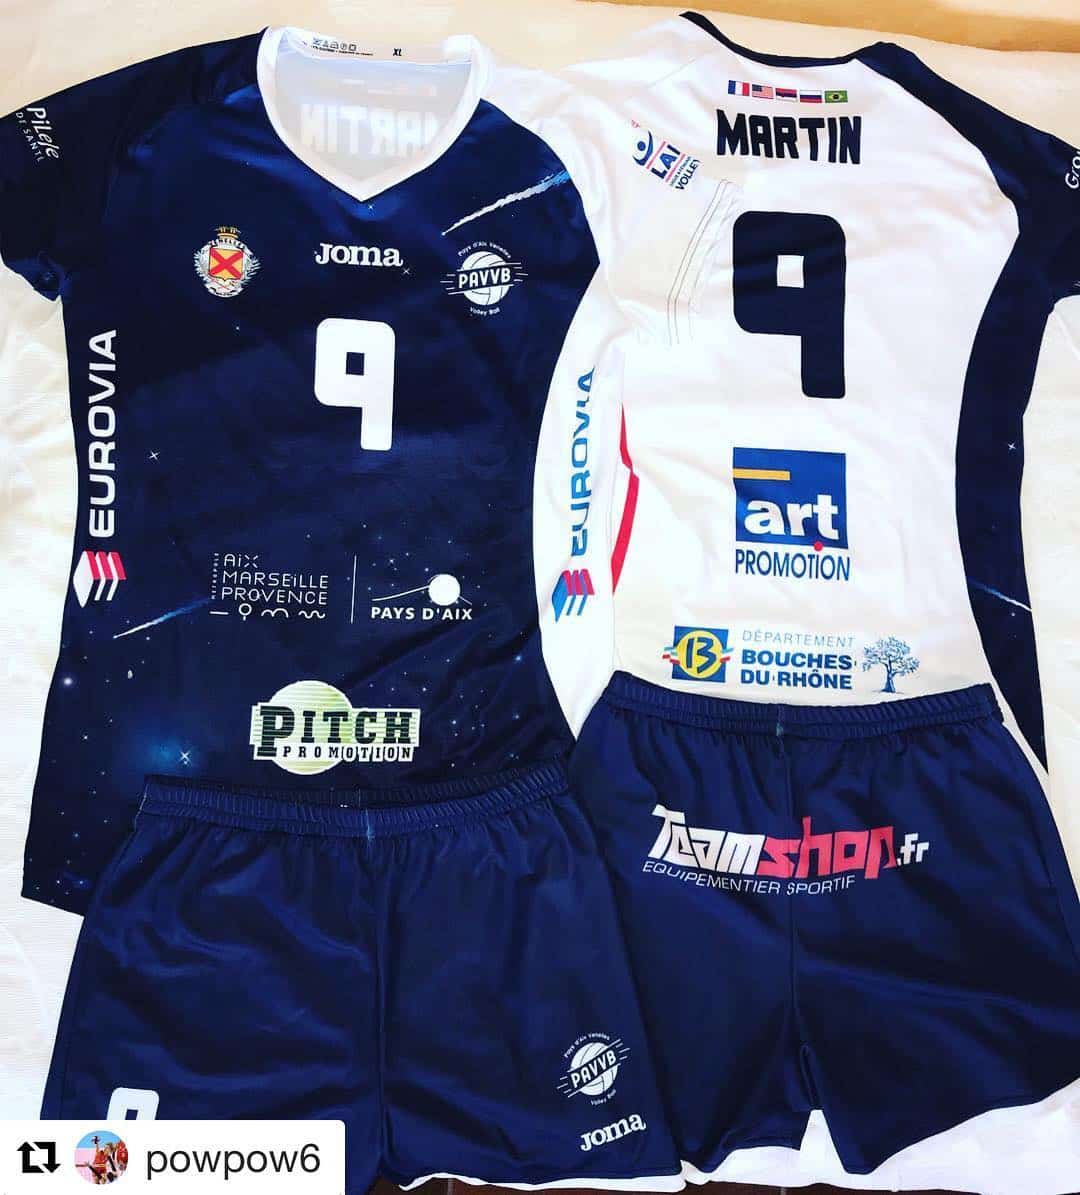 nouveau-maillot-volley-pays-d-aix-venelles-volley-ball-joma-2018-2019-laf-lnv-2